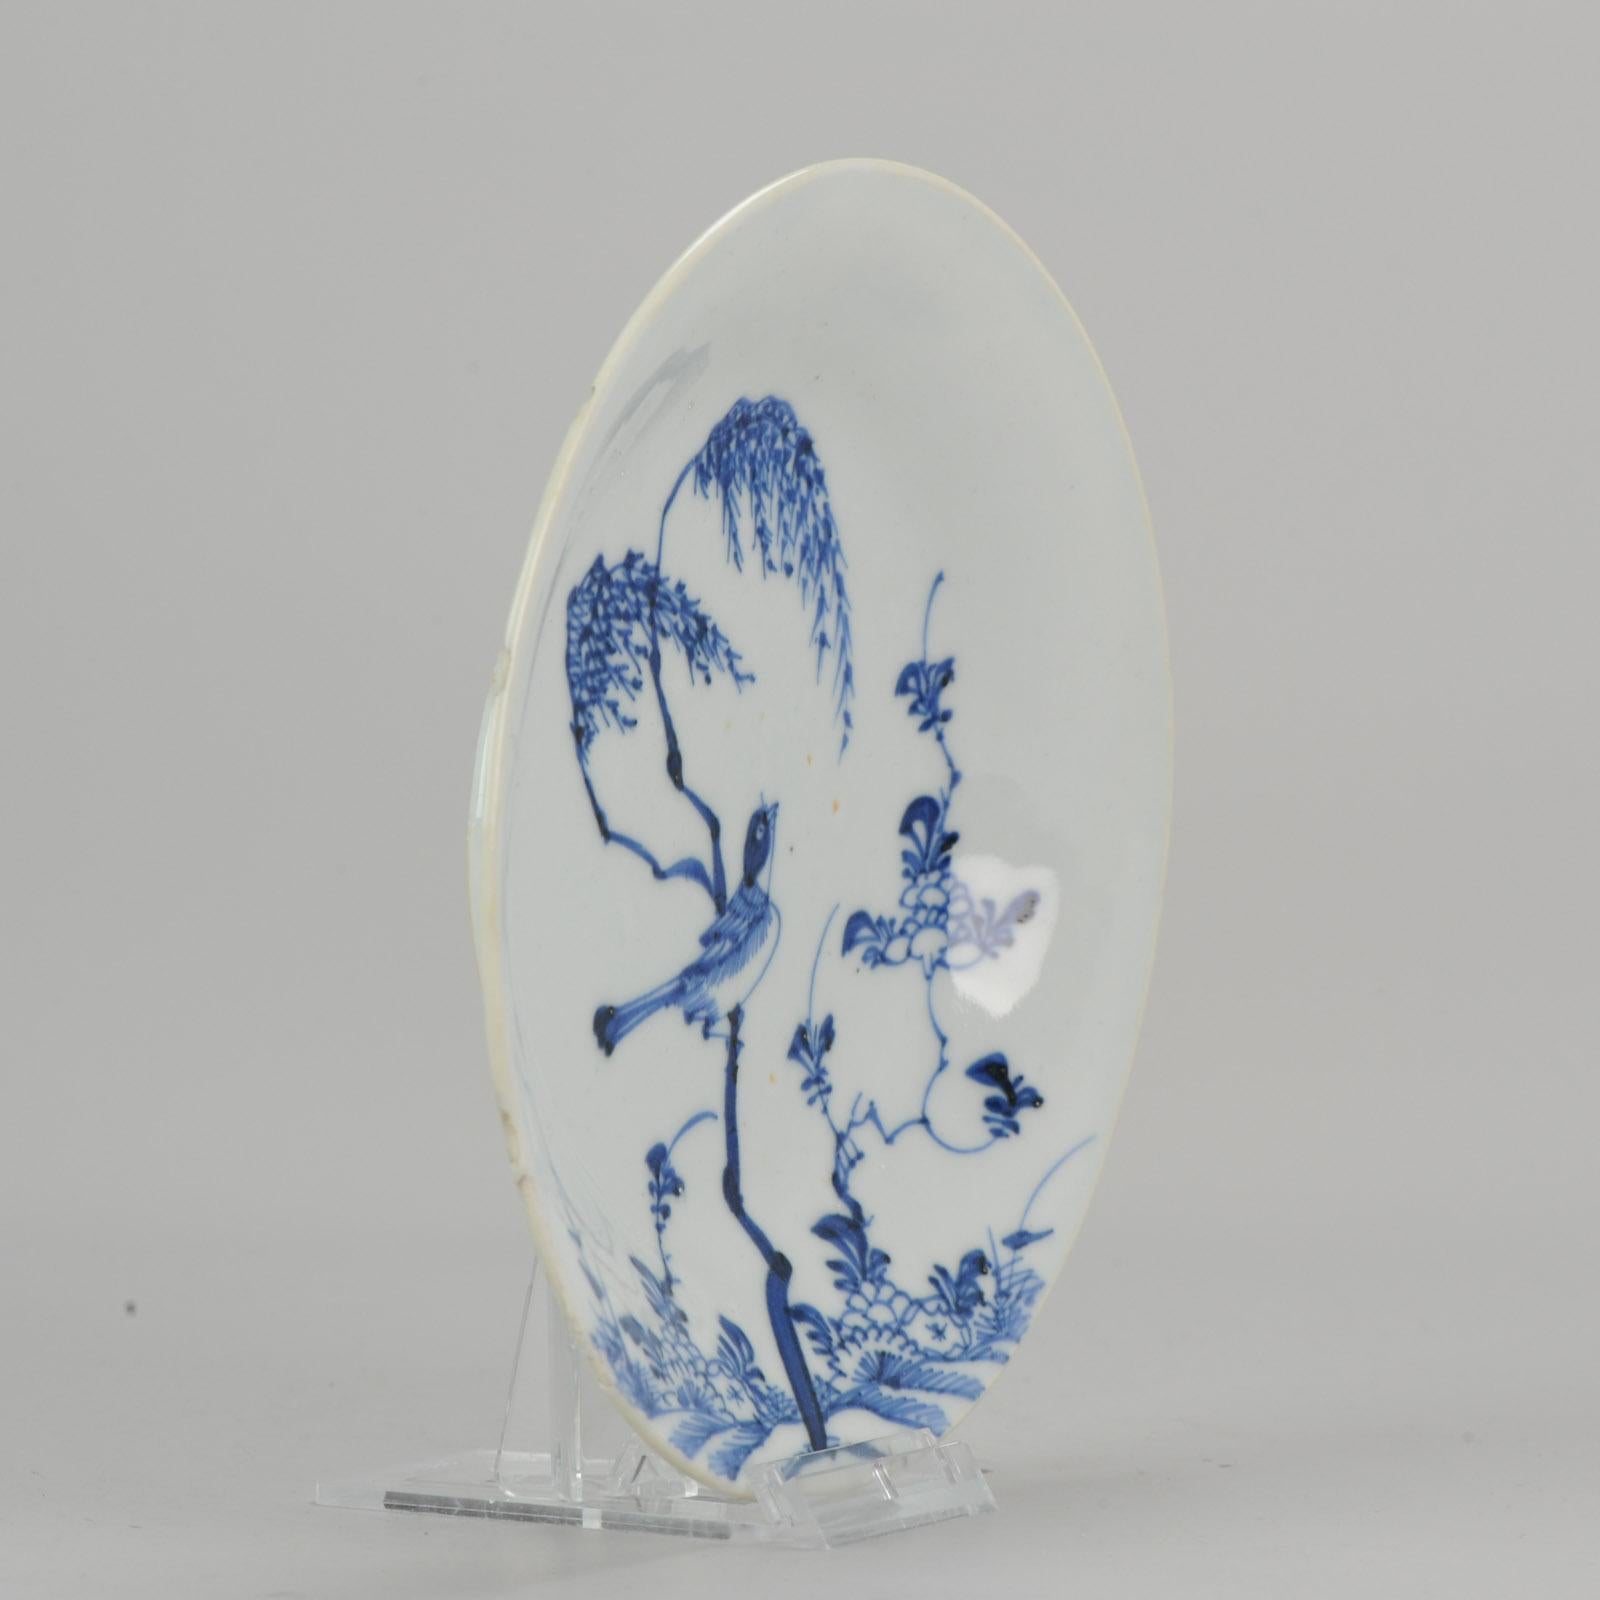 18th Century and Earlier Antique Chinese Domestic Market circa 1600 Porcelain China Plate Magpie Birds